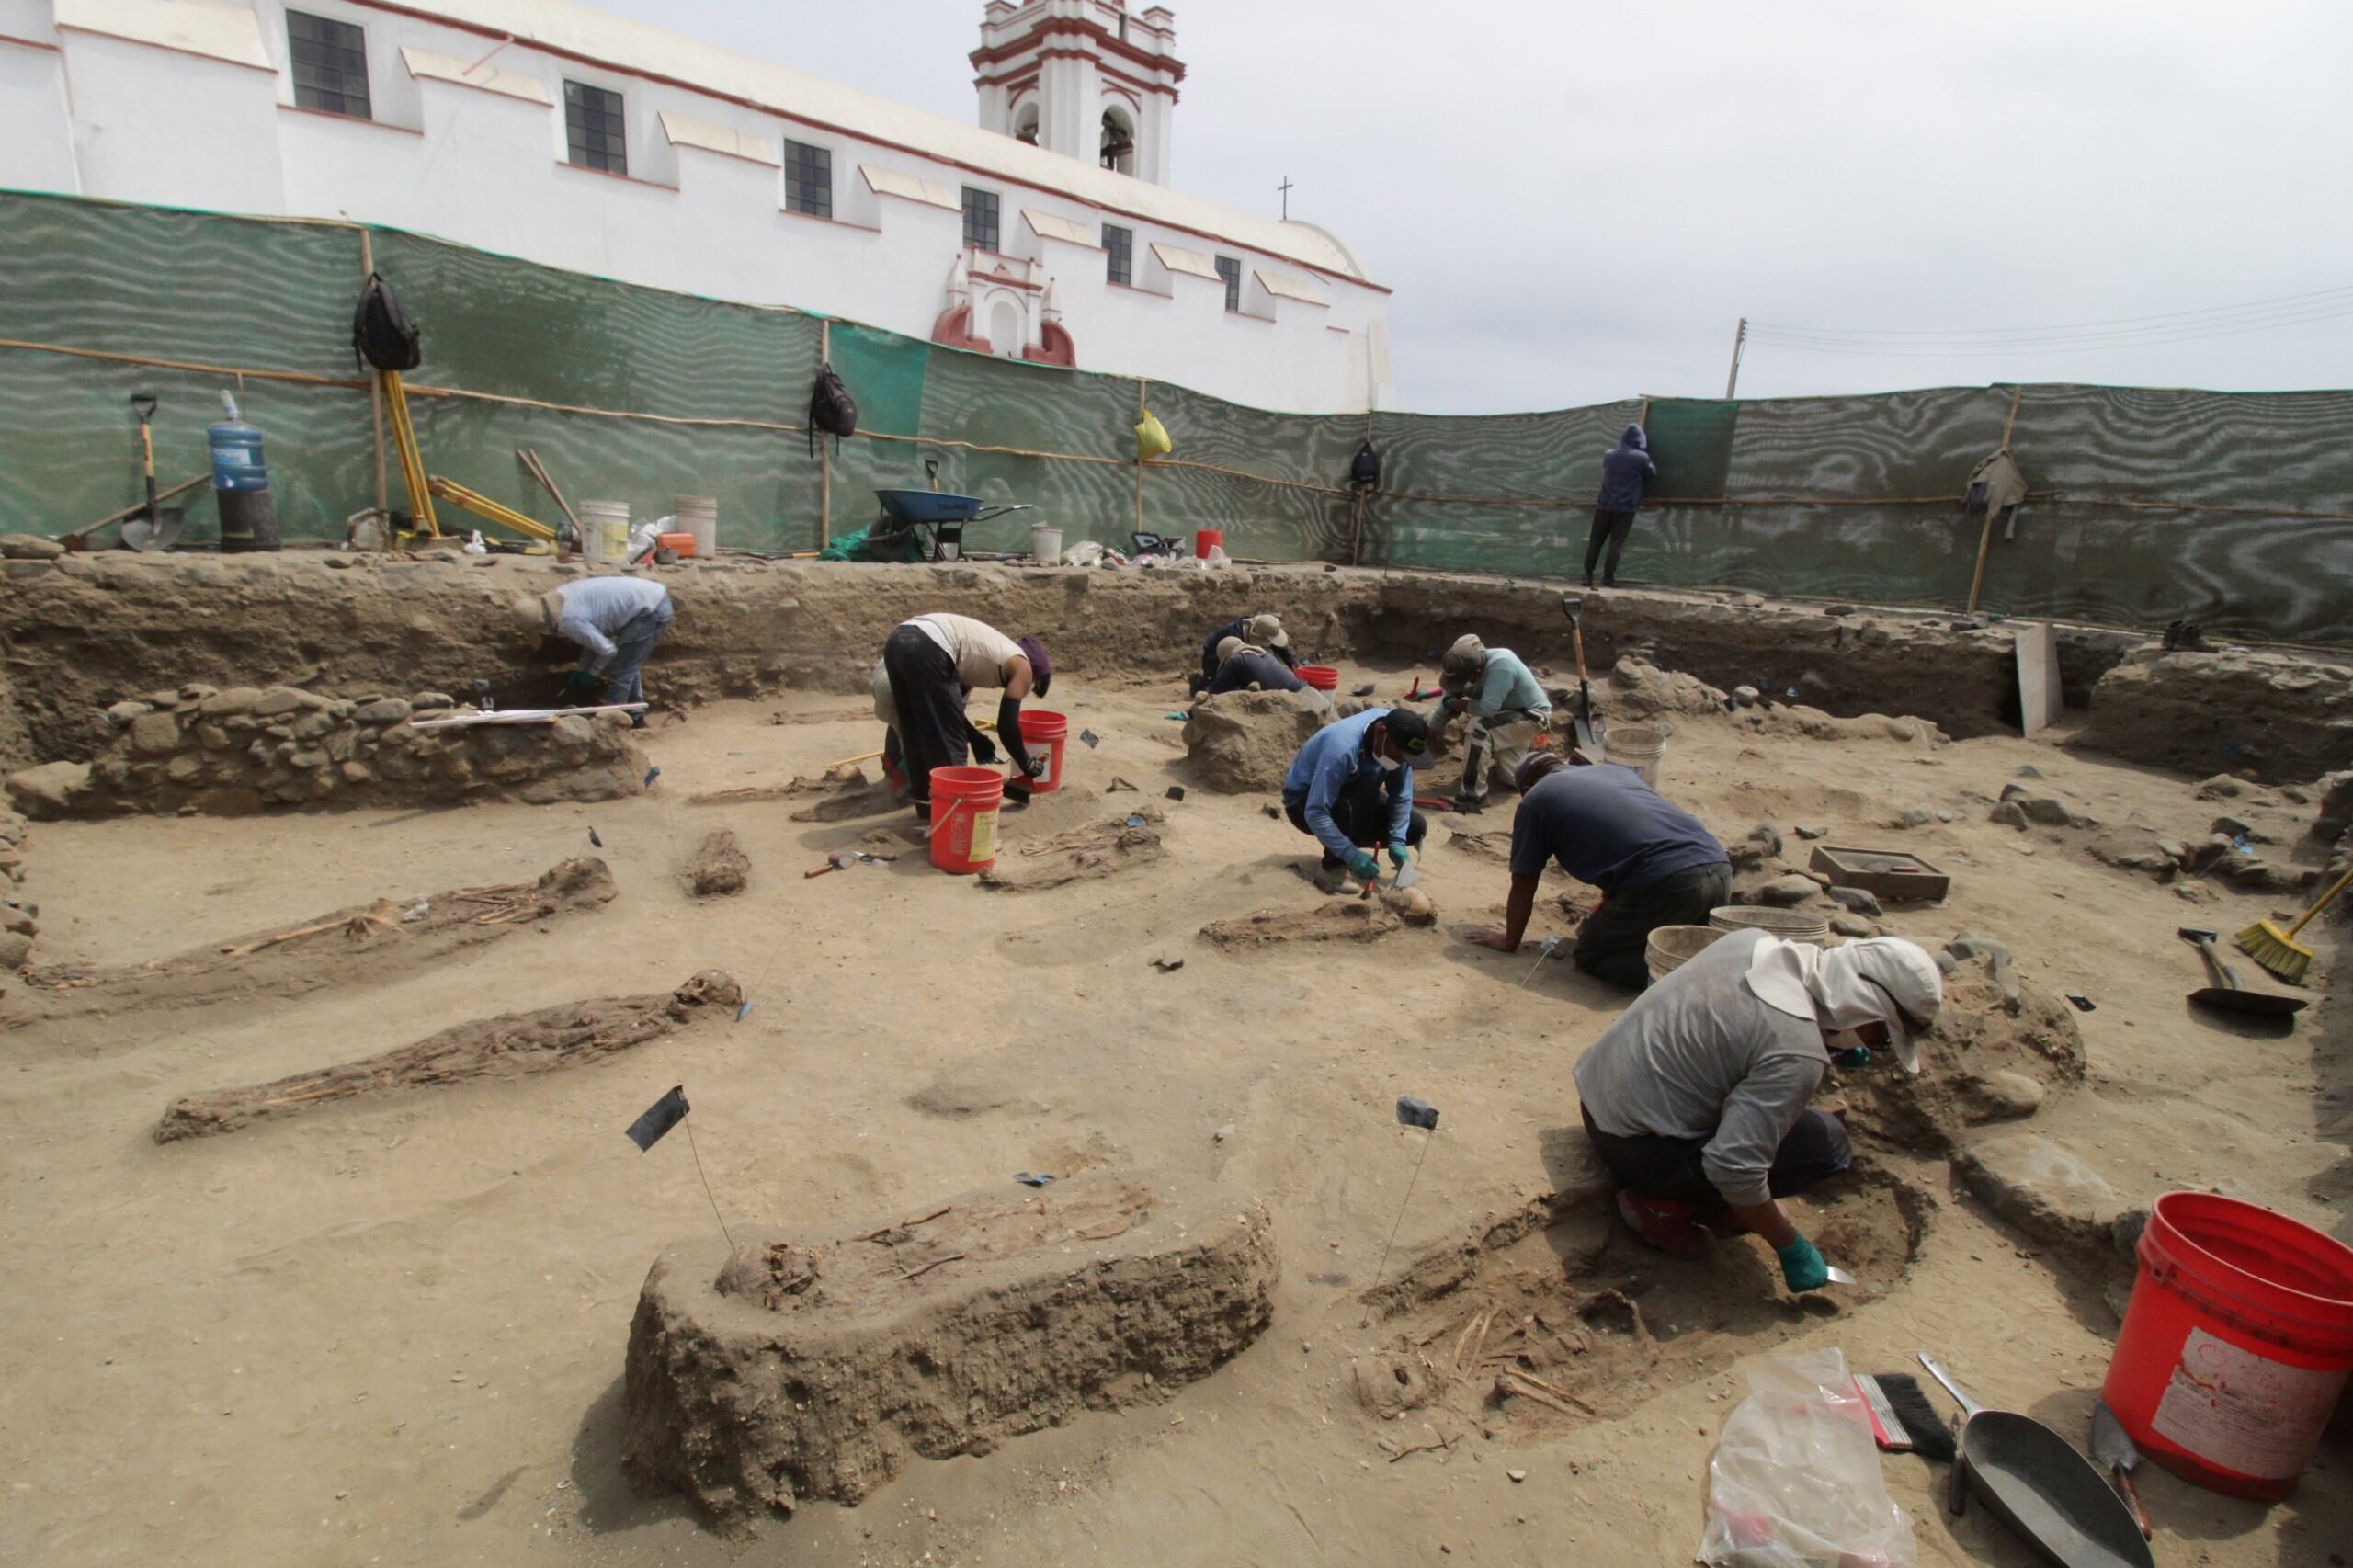 A photo of the excavation site